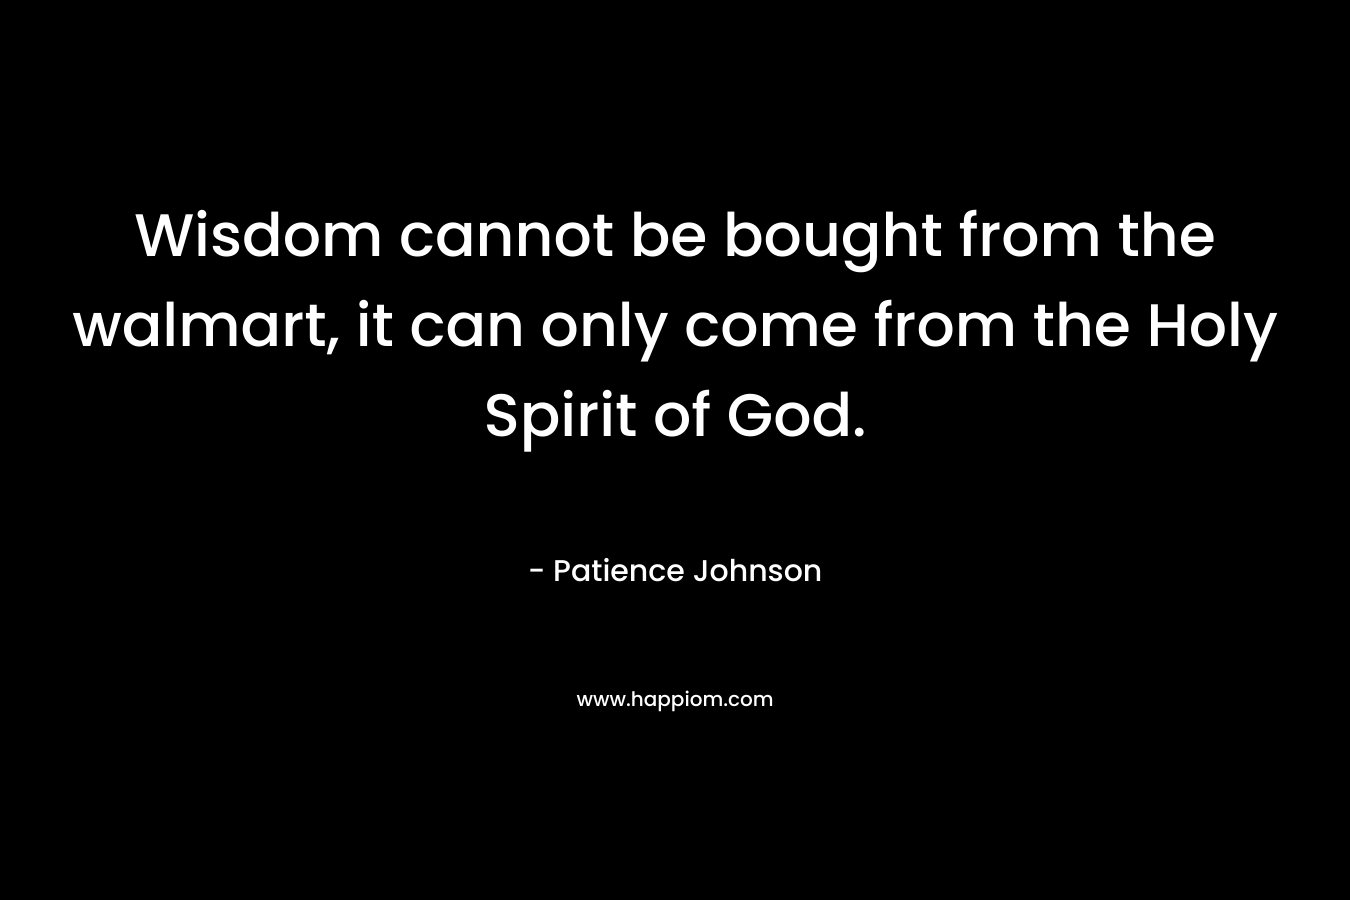 Wisdom cannot be bought from the walmart, it can only come from the Holy Spirit of God.